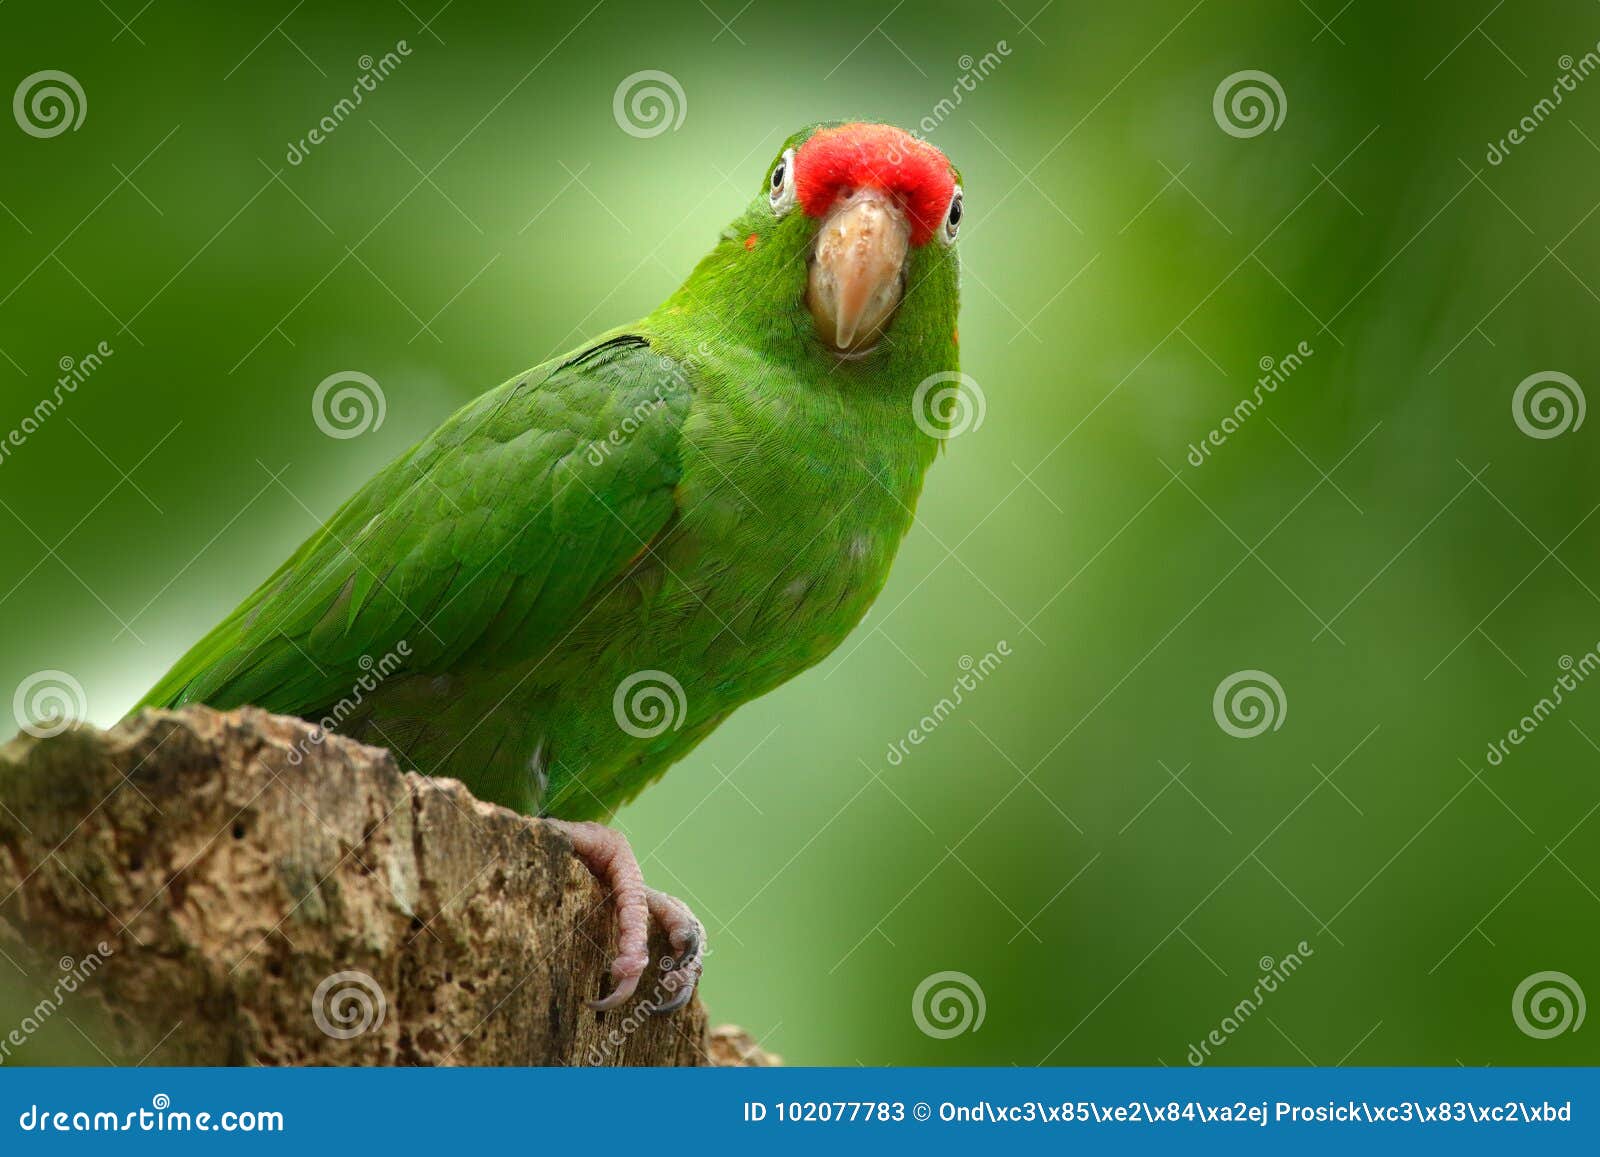 parrot from costa rica. parakket in habitat. crimson-fronted parakeet, aratinga funschi, portrait of light green parrot with red h